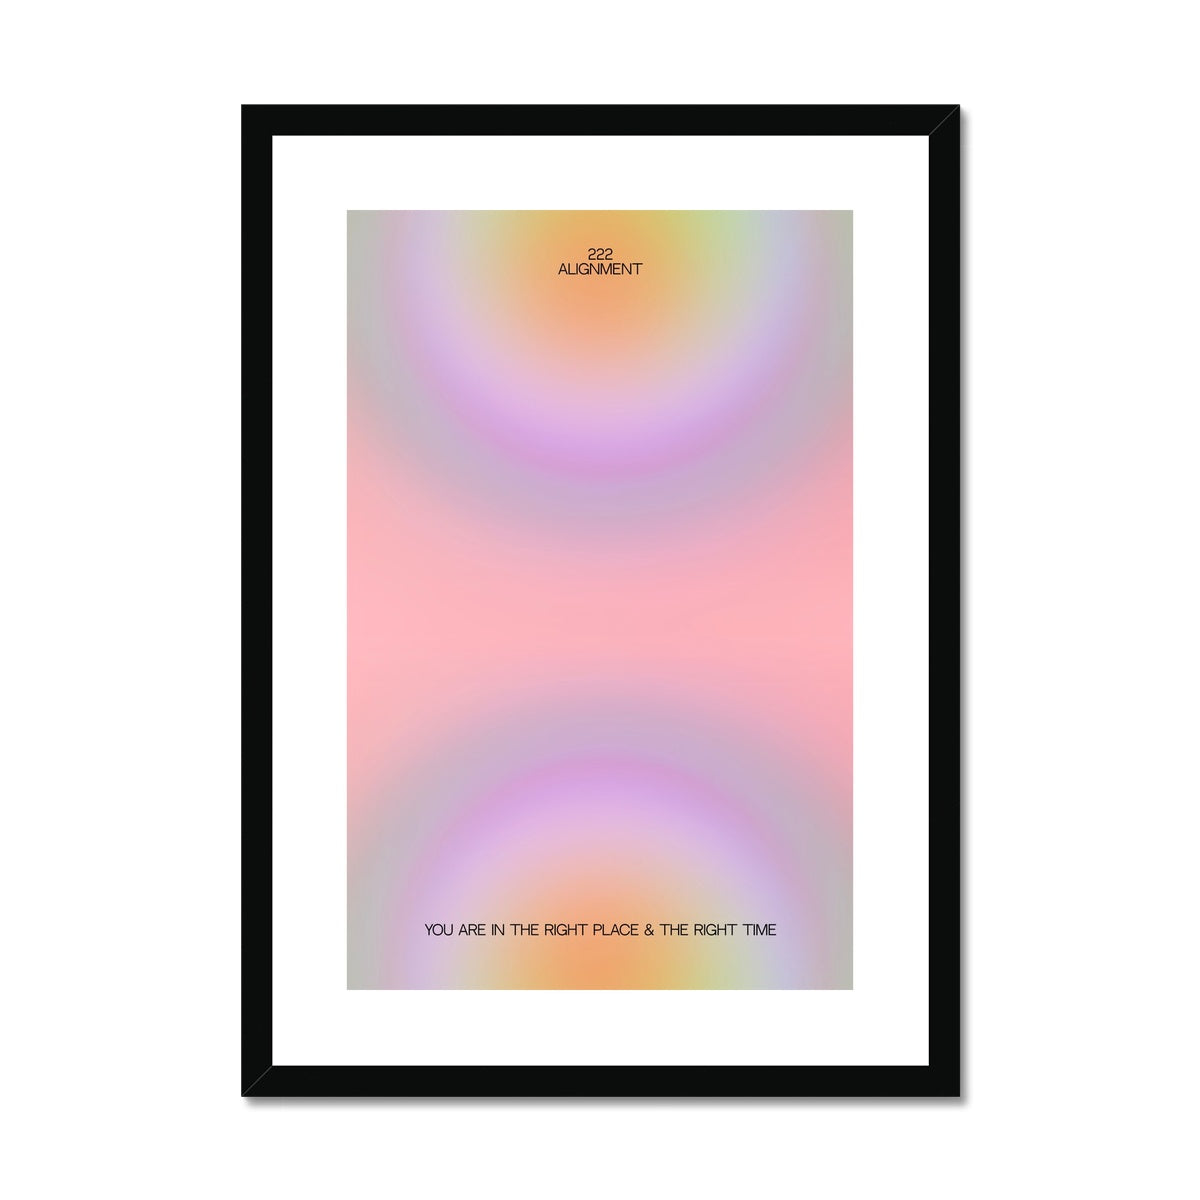 222 alignment Framed & Mounted Print